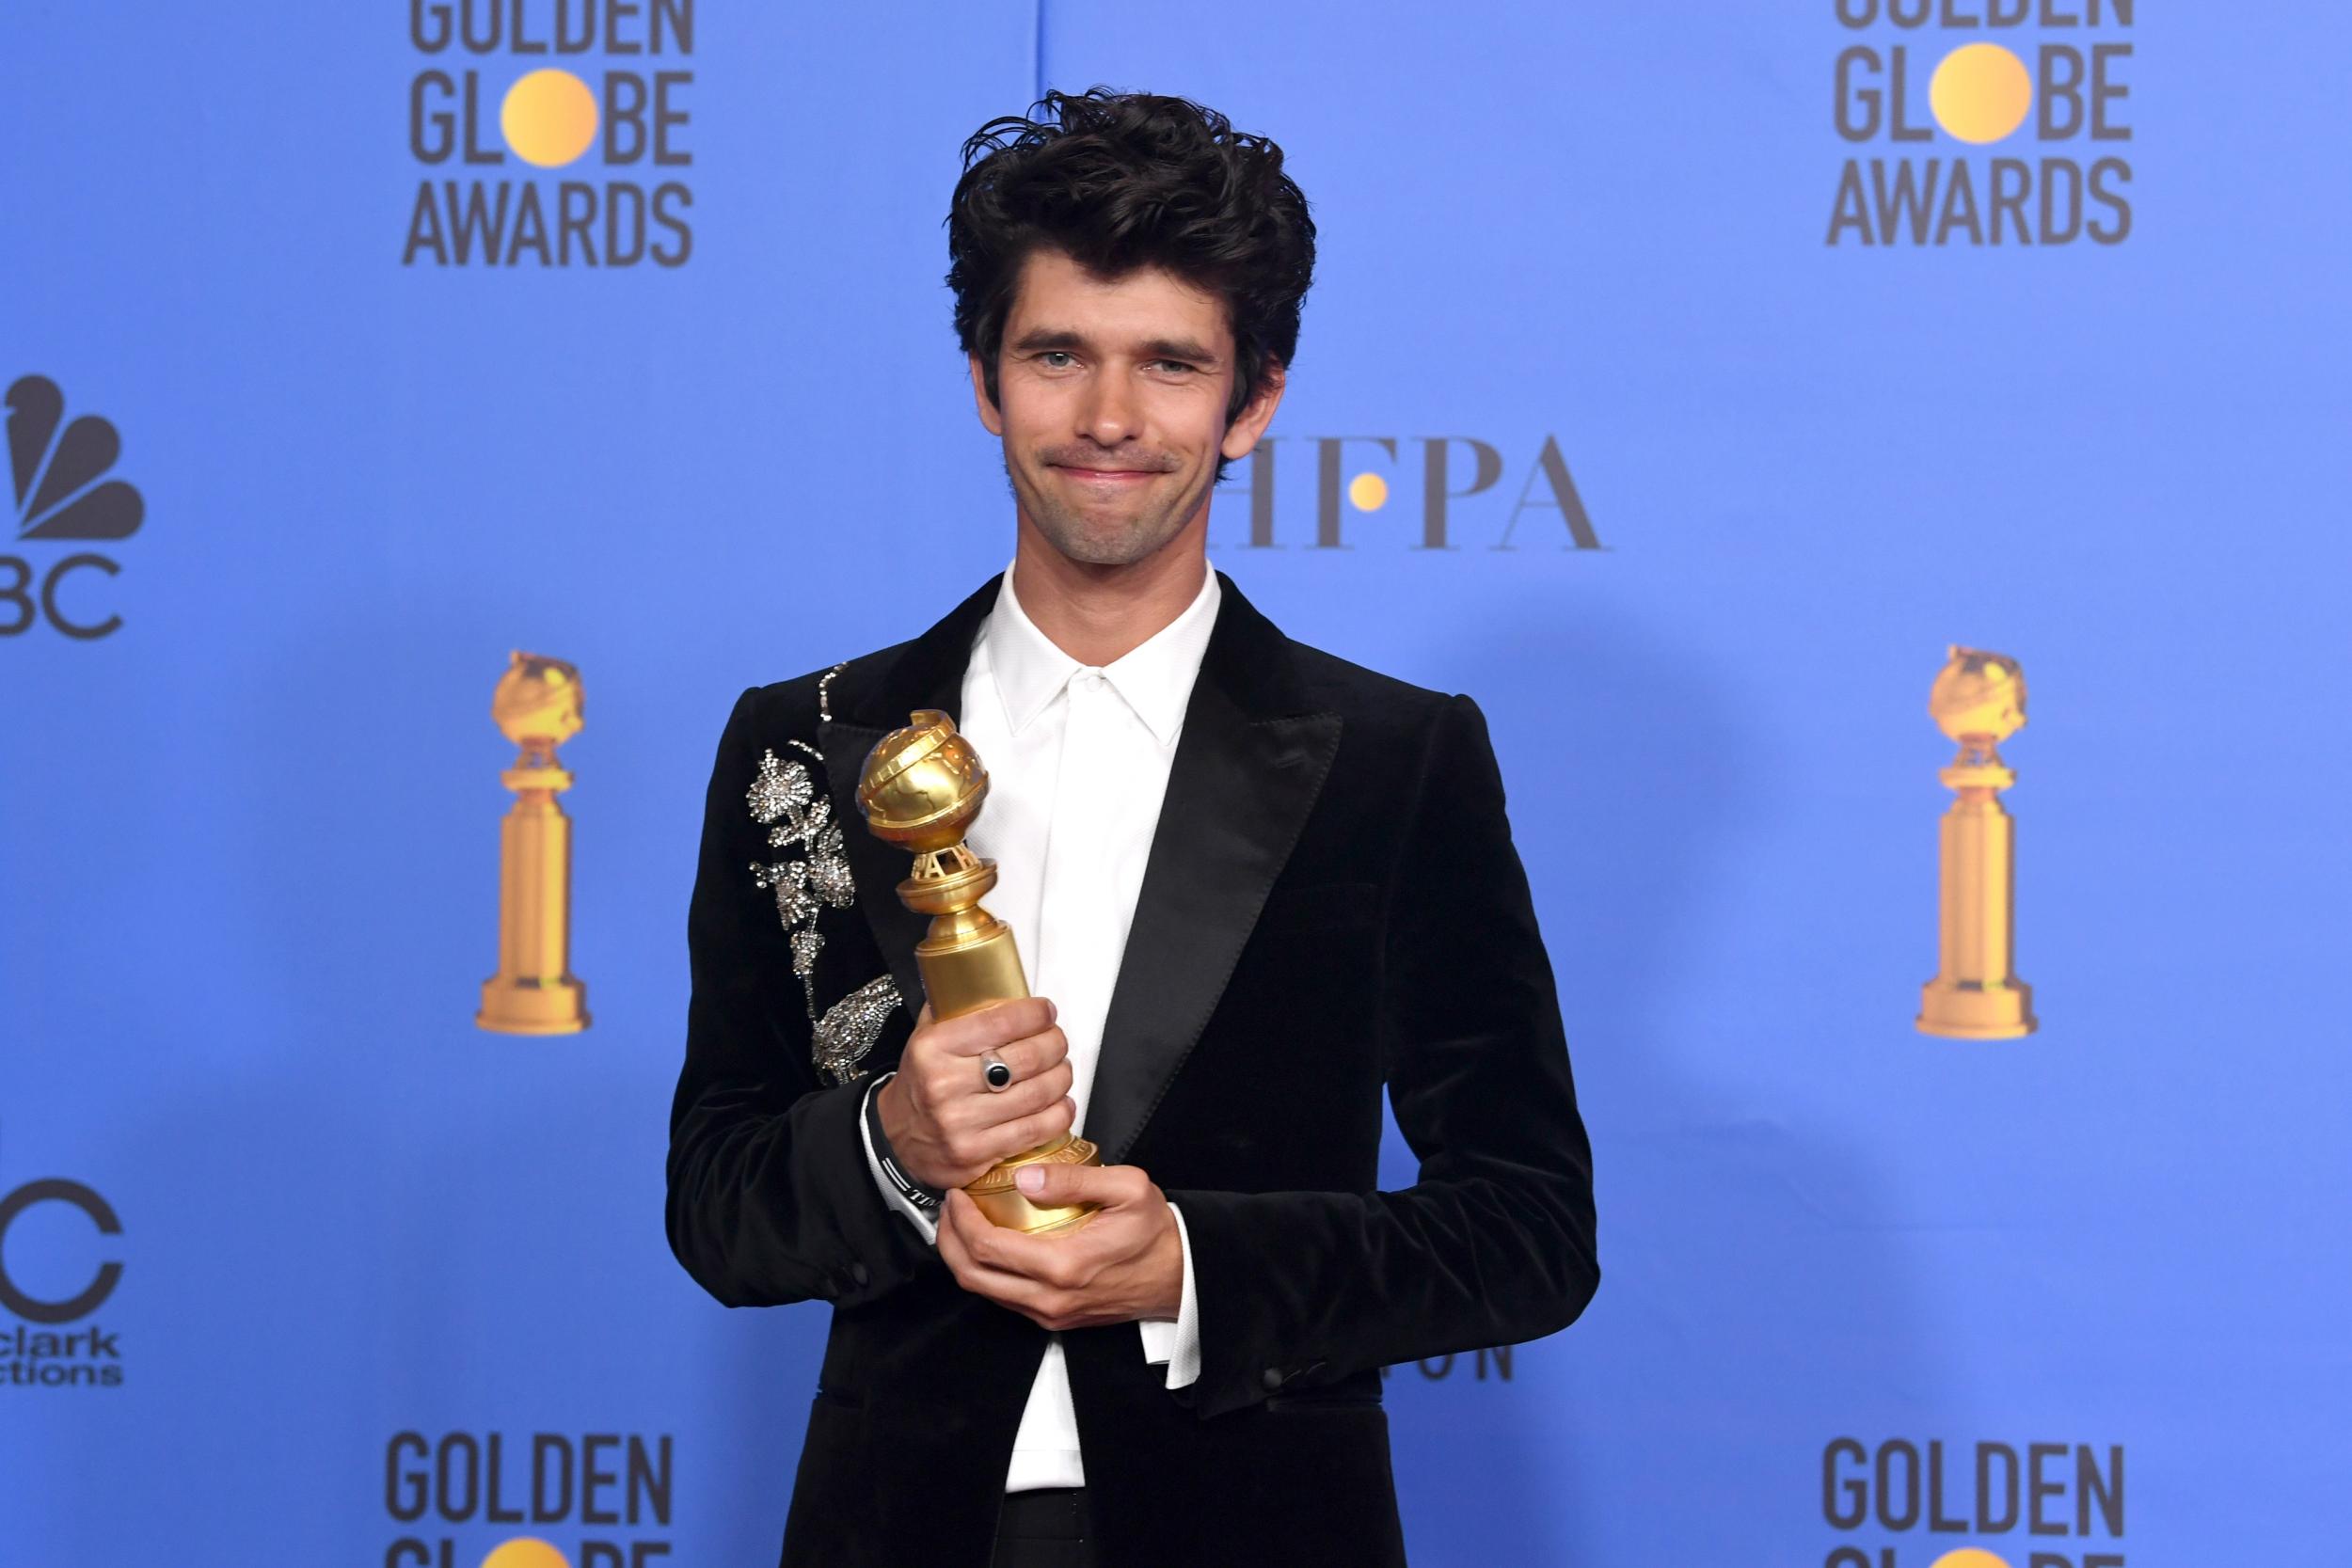 Best Performance by an Actor in a Supporting Role in a Series, Limited Series or Motion Picture Made for Television: Ben Whishaw (A Very English Scandal)